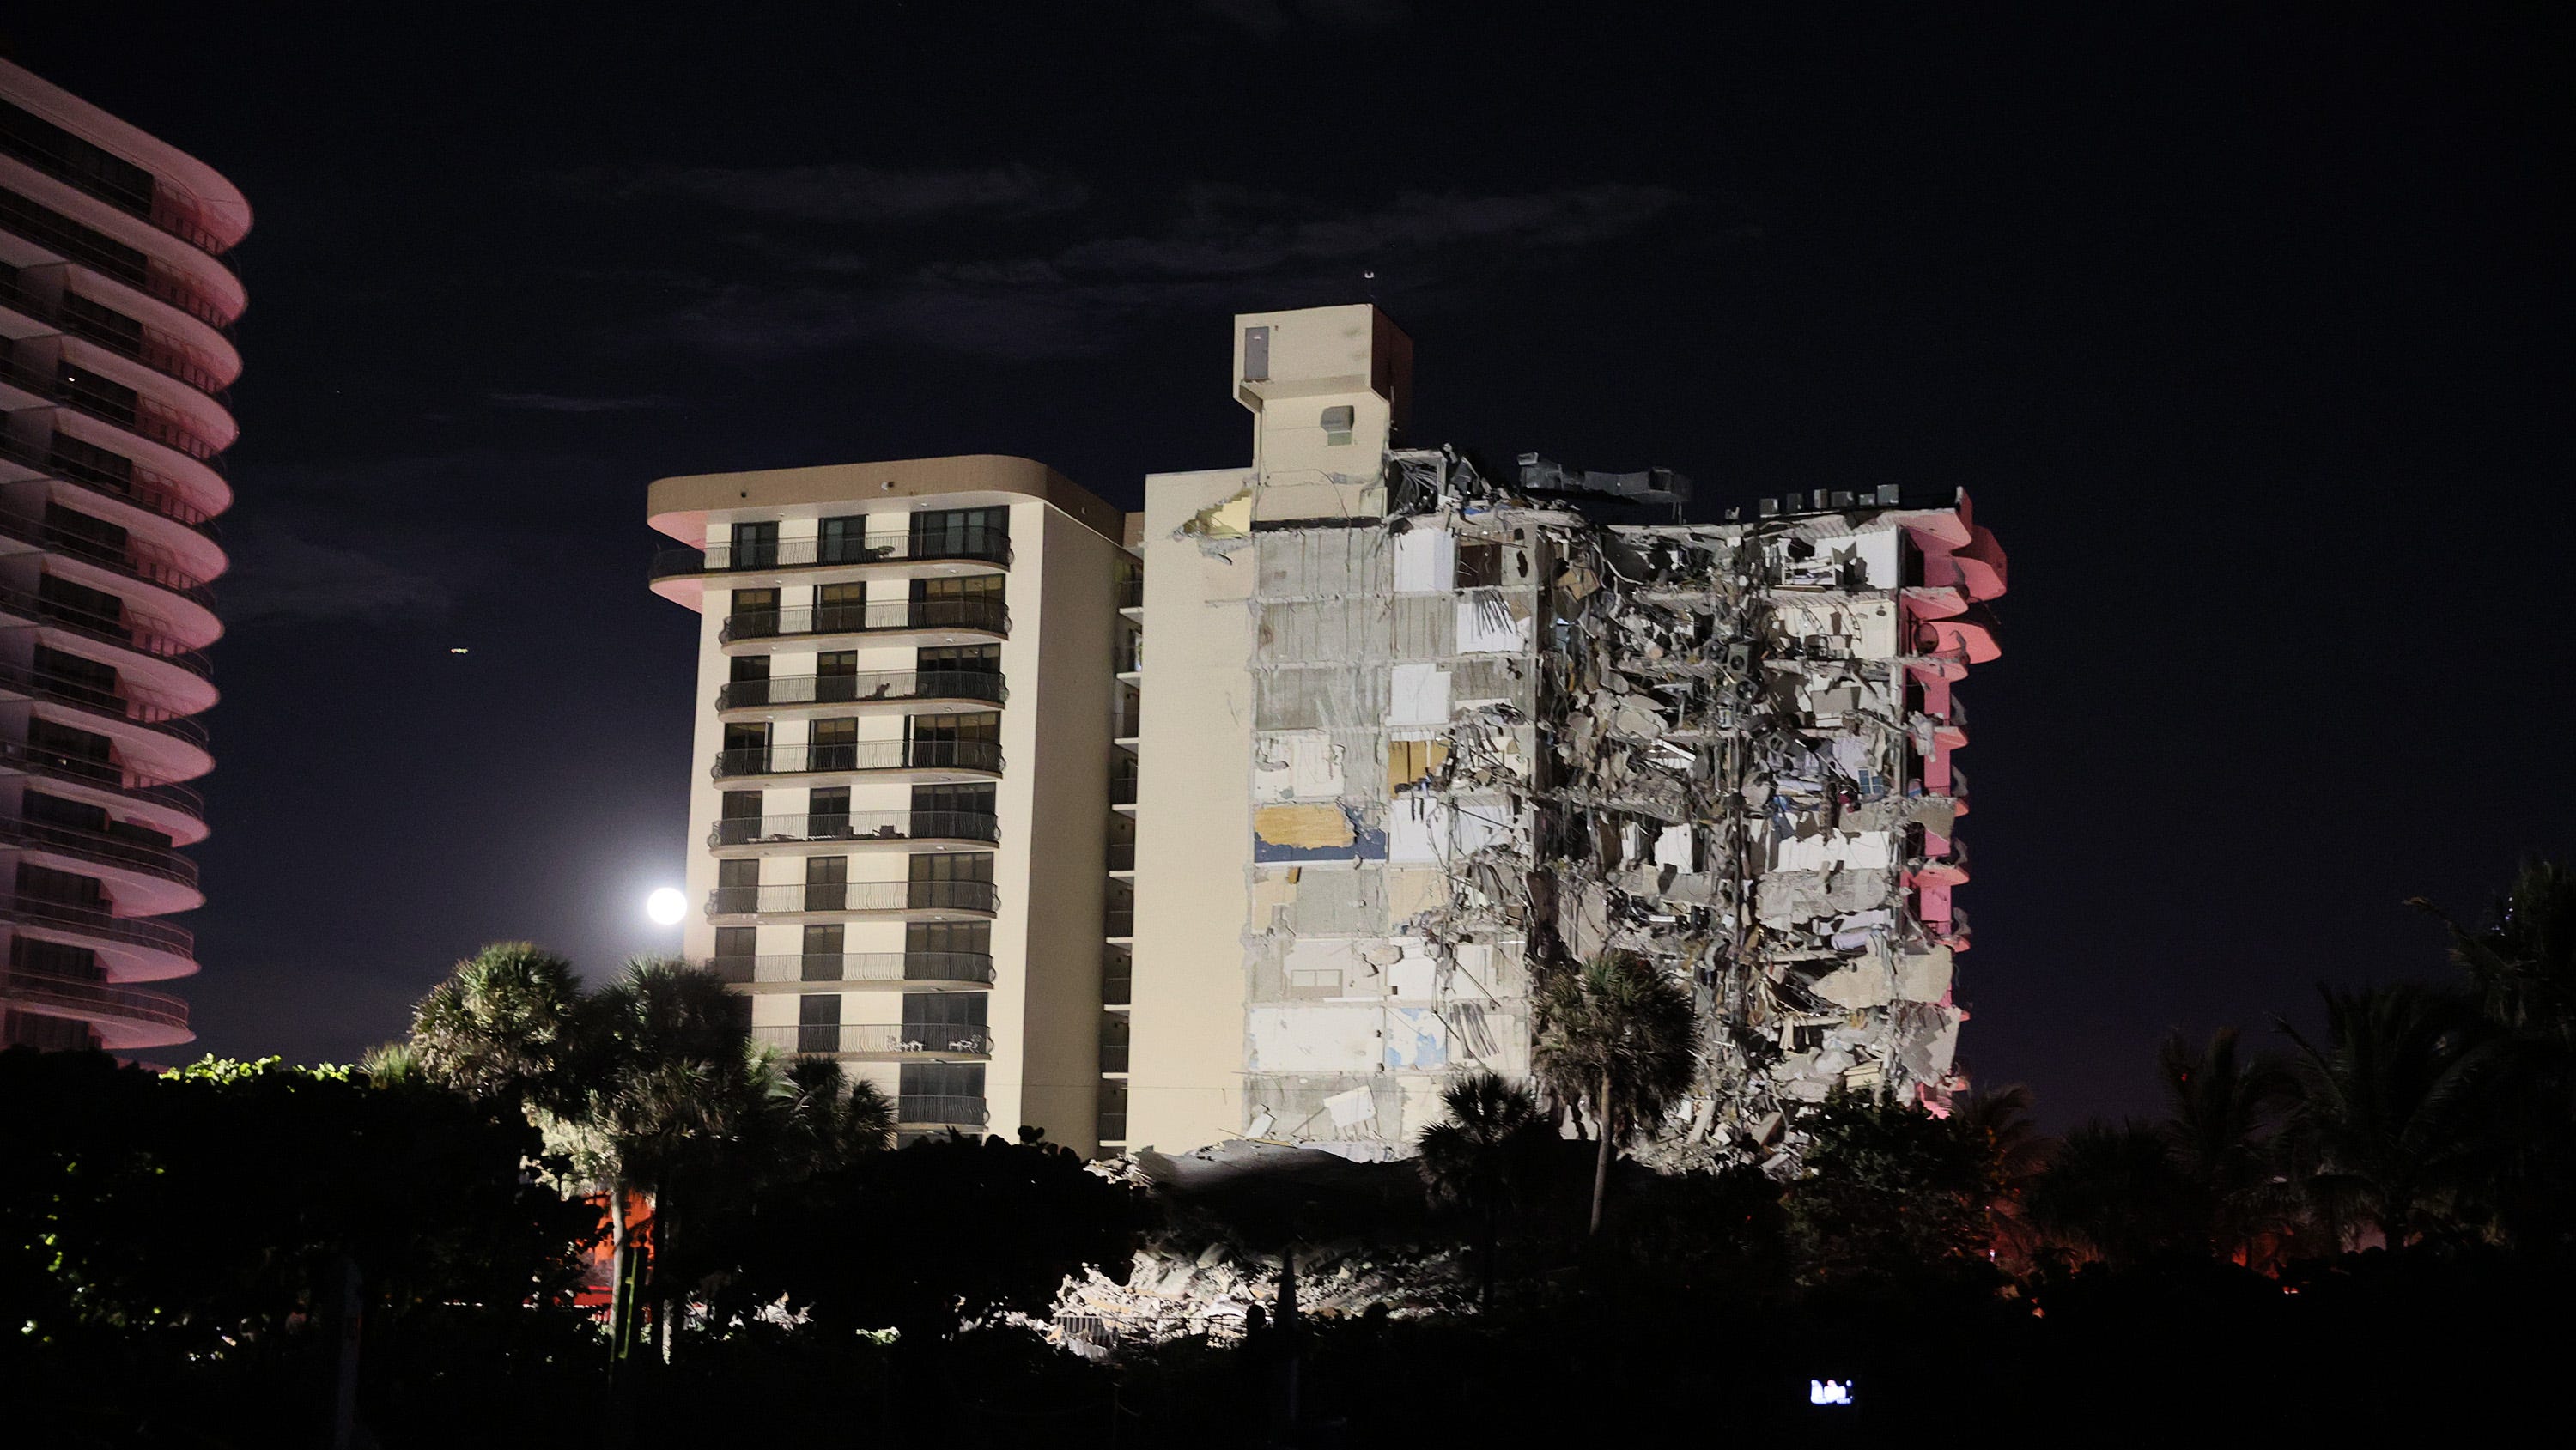 A portion of the 12-story condo tower crumbled to the ground following a partial collapse of the building on June 24, 2021 in the Surfside area of Miami, Fla.